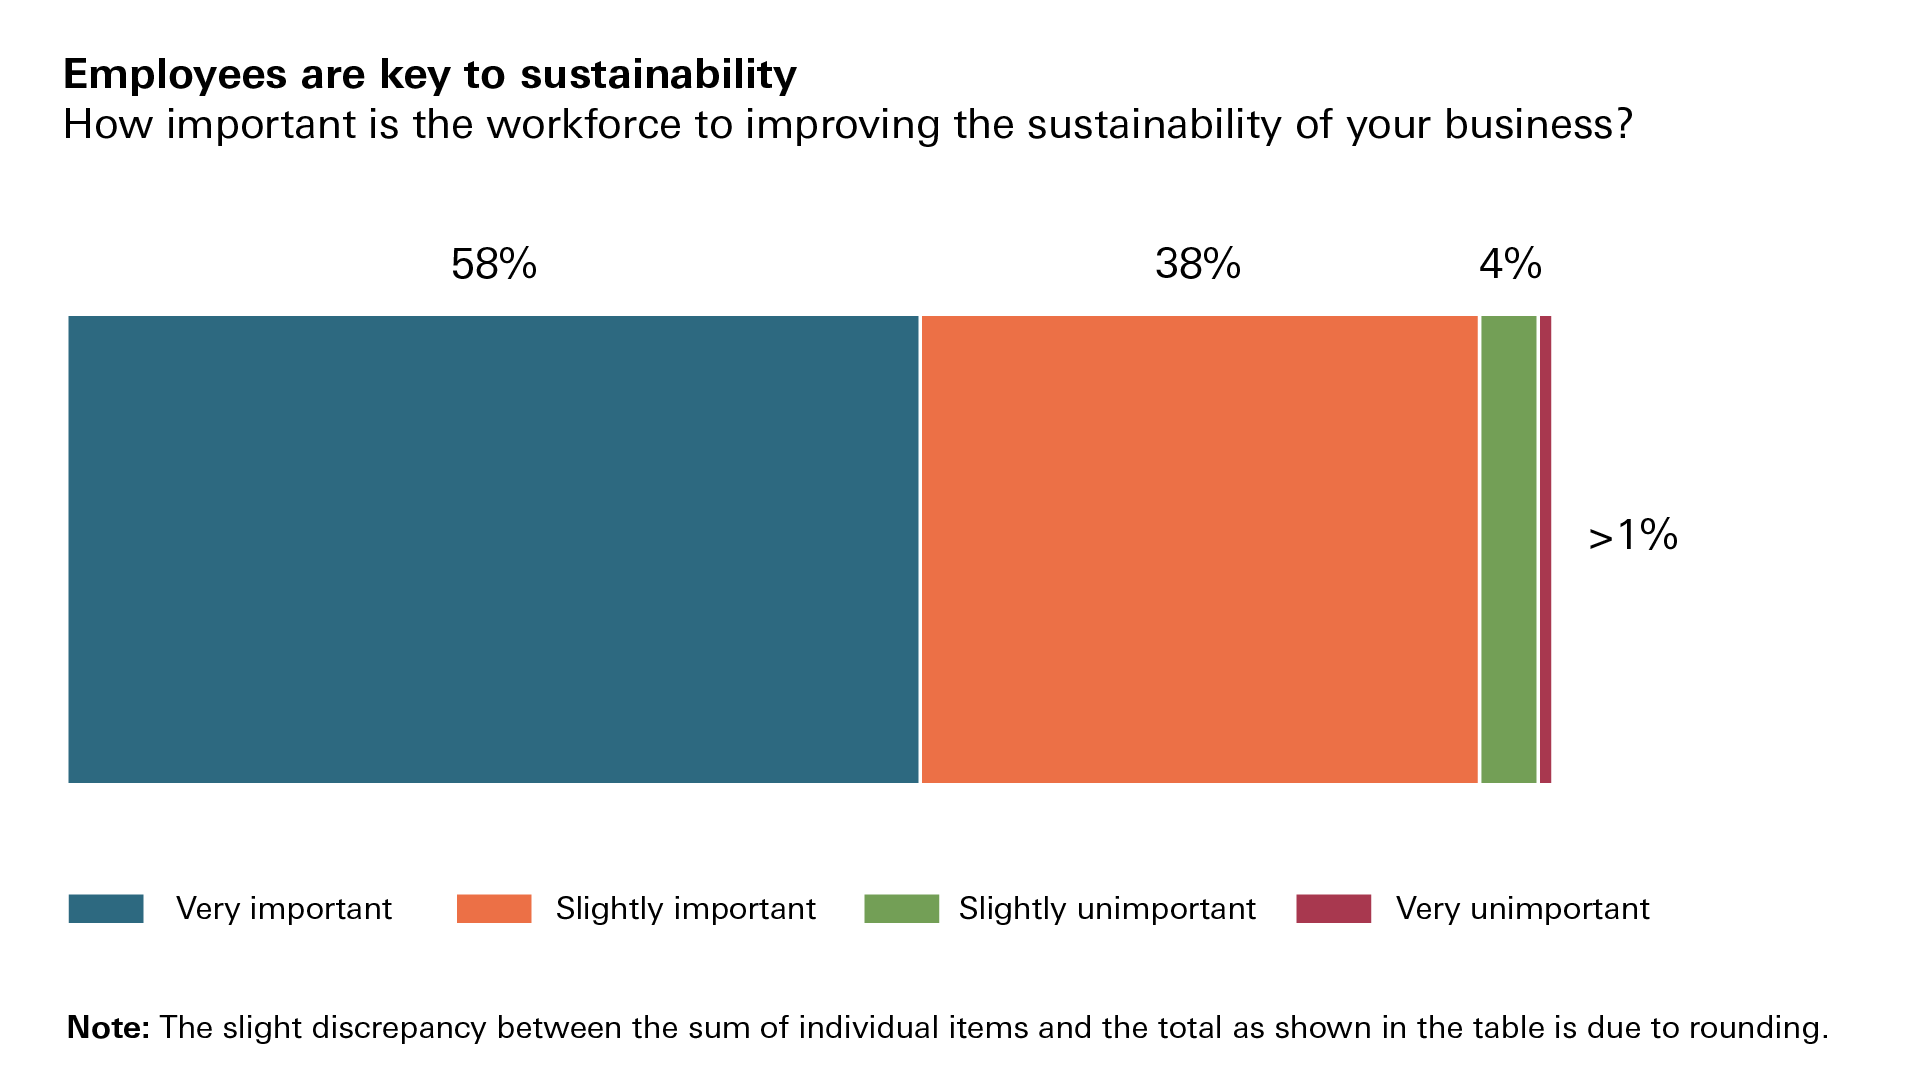 Chart showing how important/unimportant businesses think the workforce is to improving sustainability credentials 